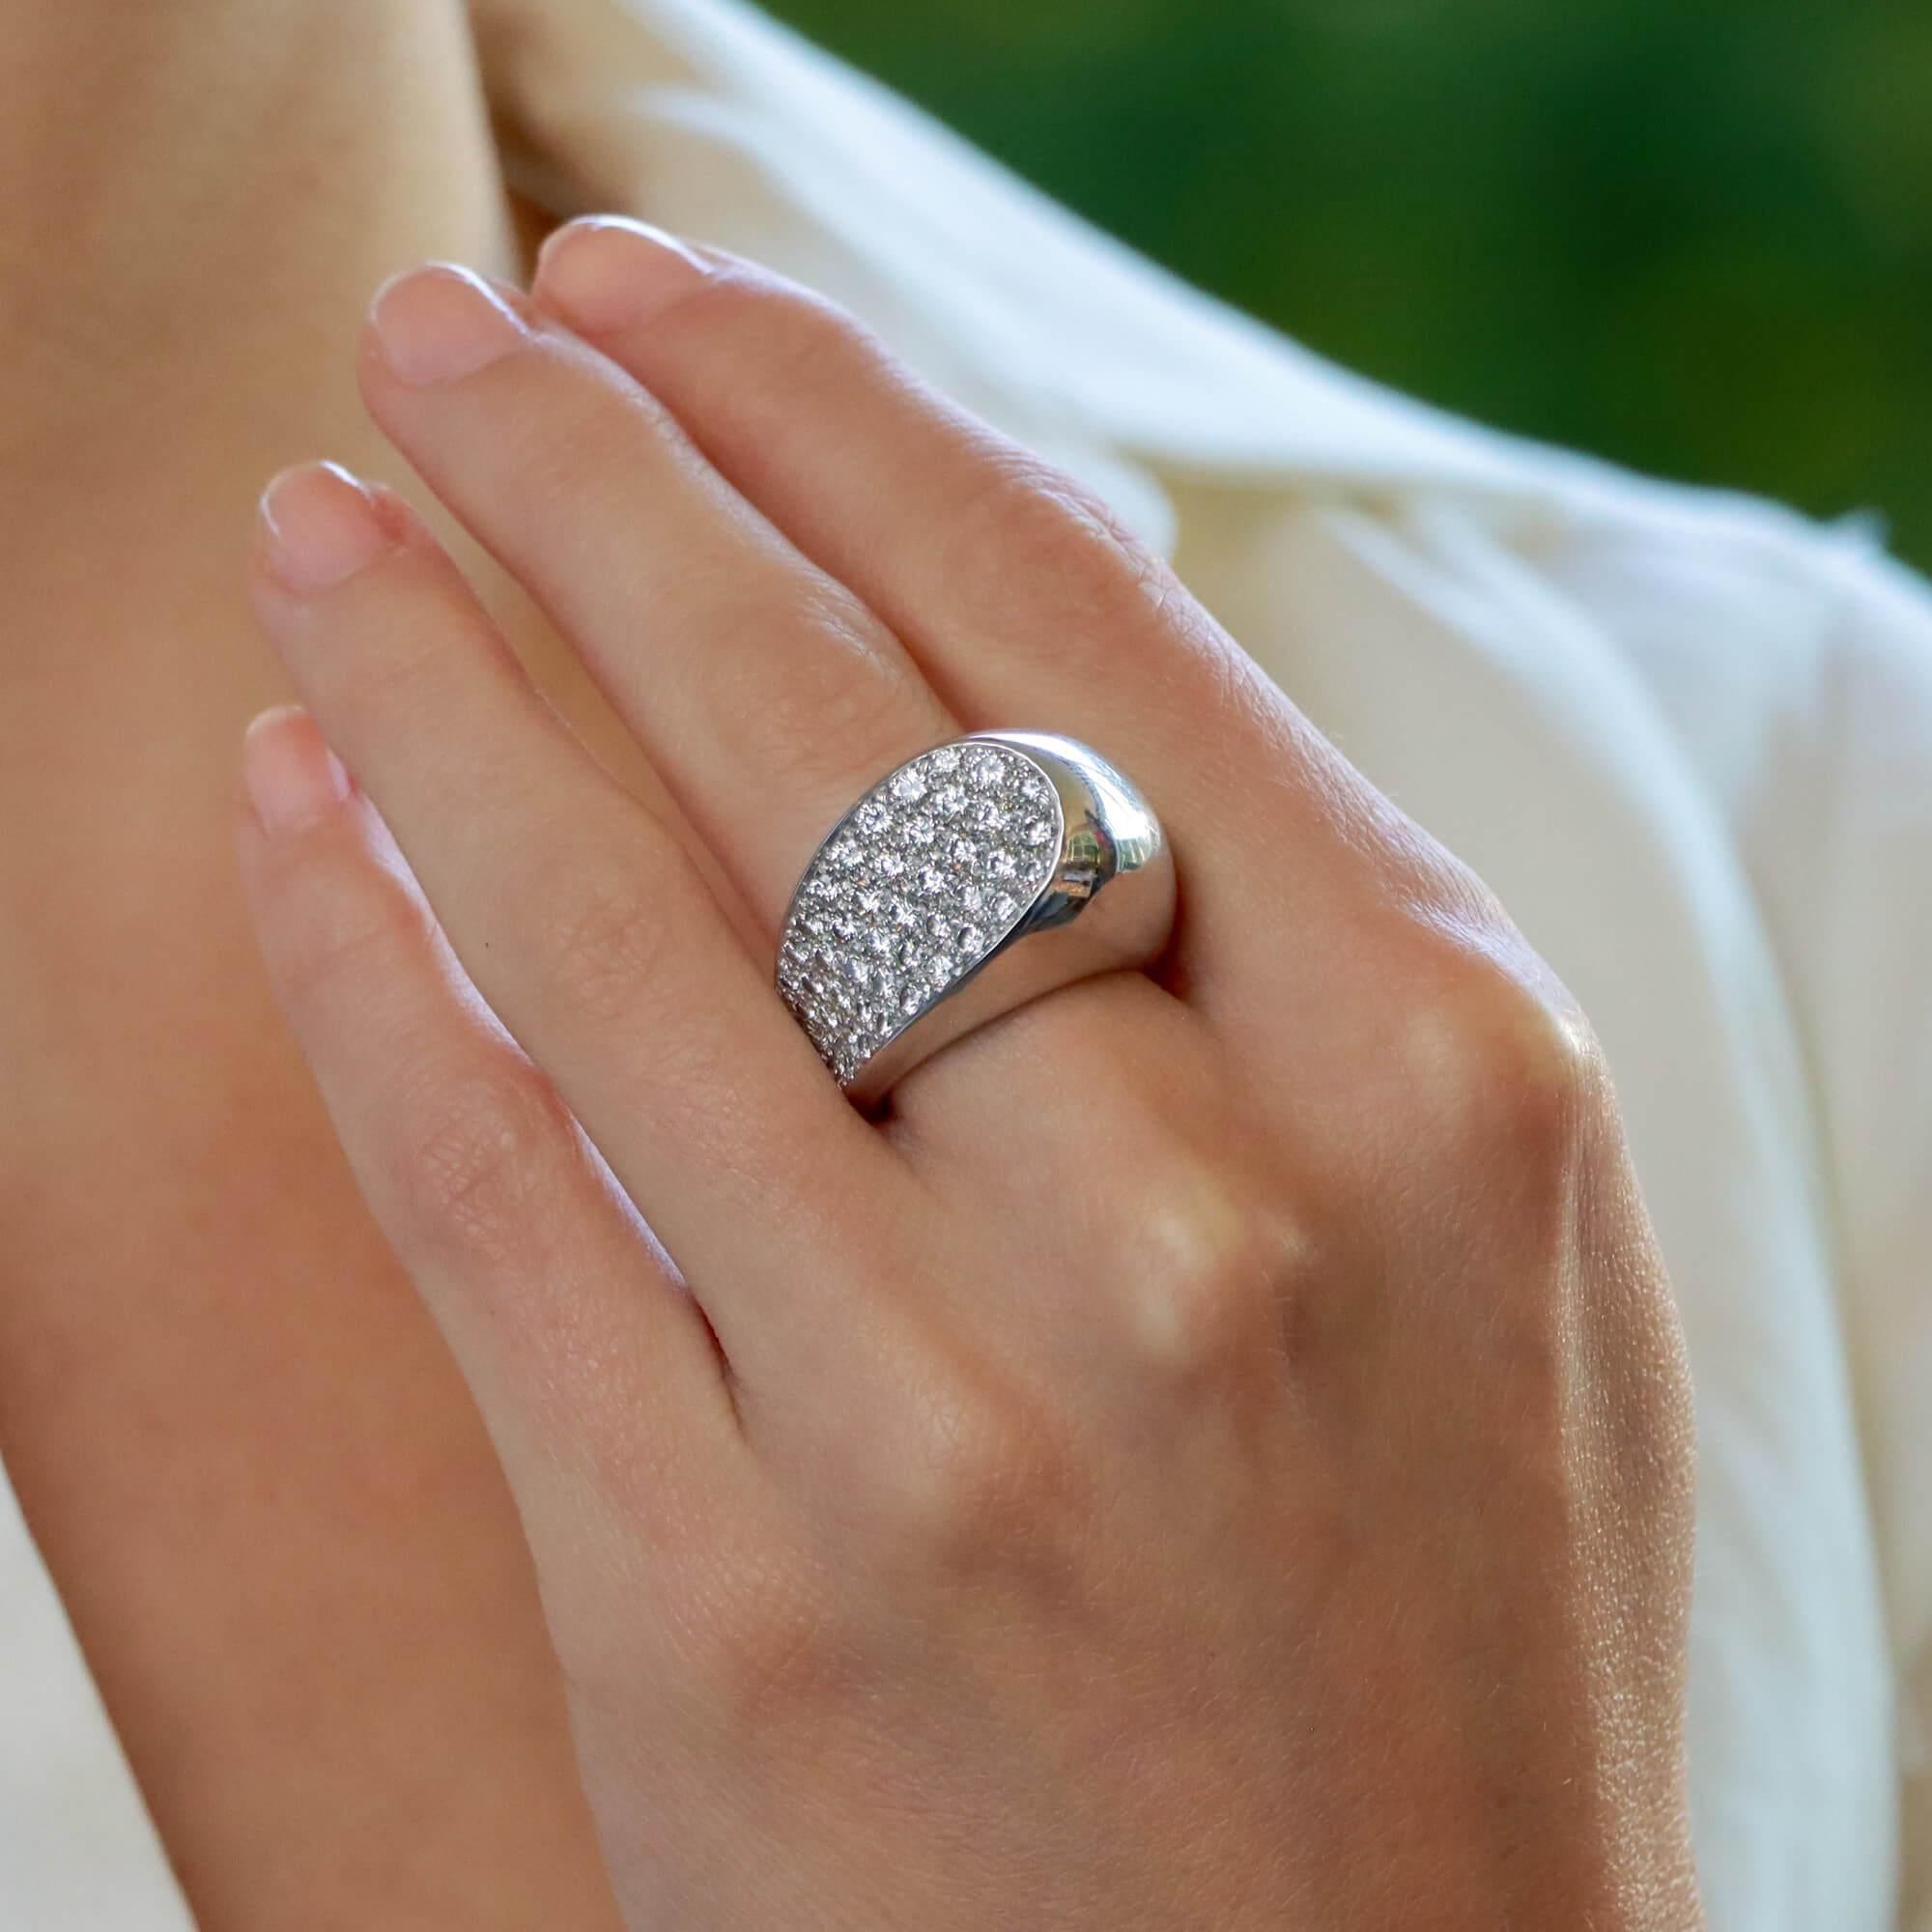 An extremely beautiful vintage Fred Paris diamond cocktail ring, set in 18k white gold.

This striking piece is pave set throughout with round brilliant cut diamonds which altogether creates this remarkable design. Once on, the piece truly comes to